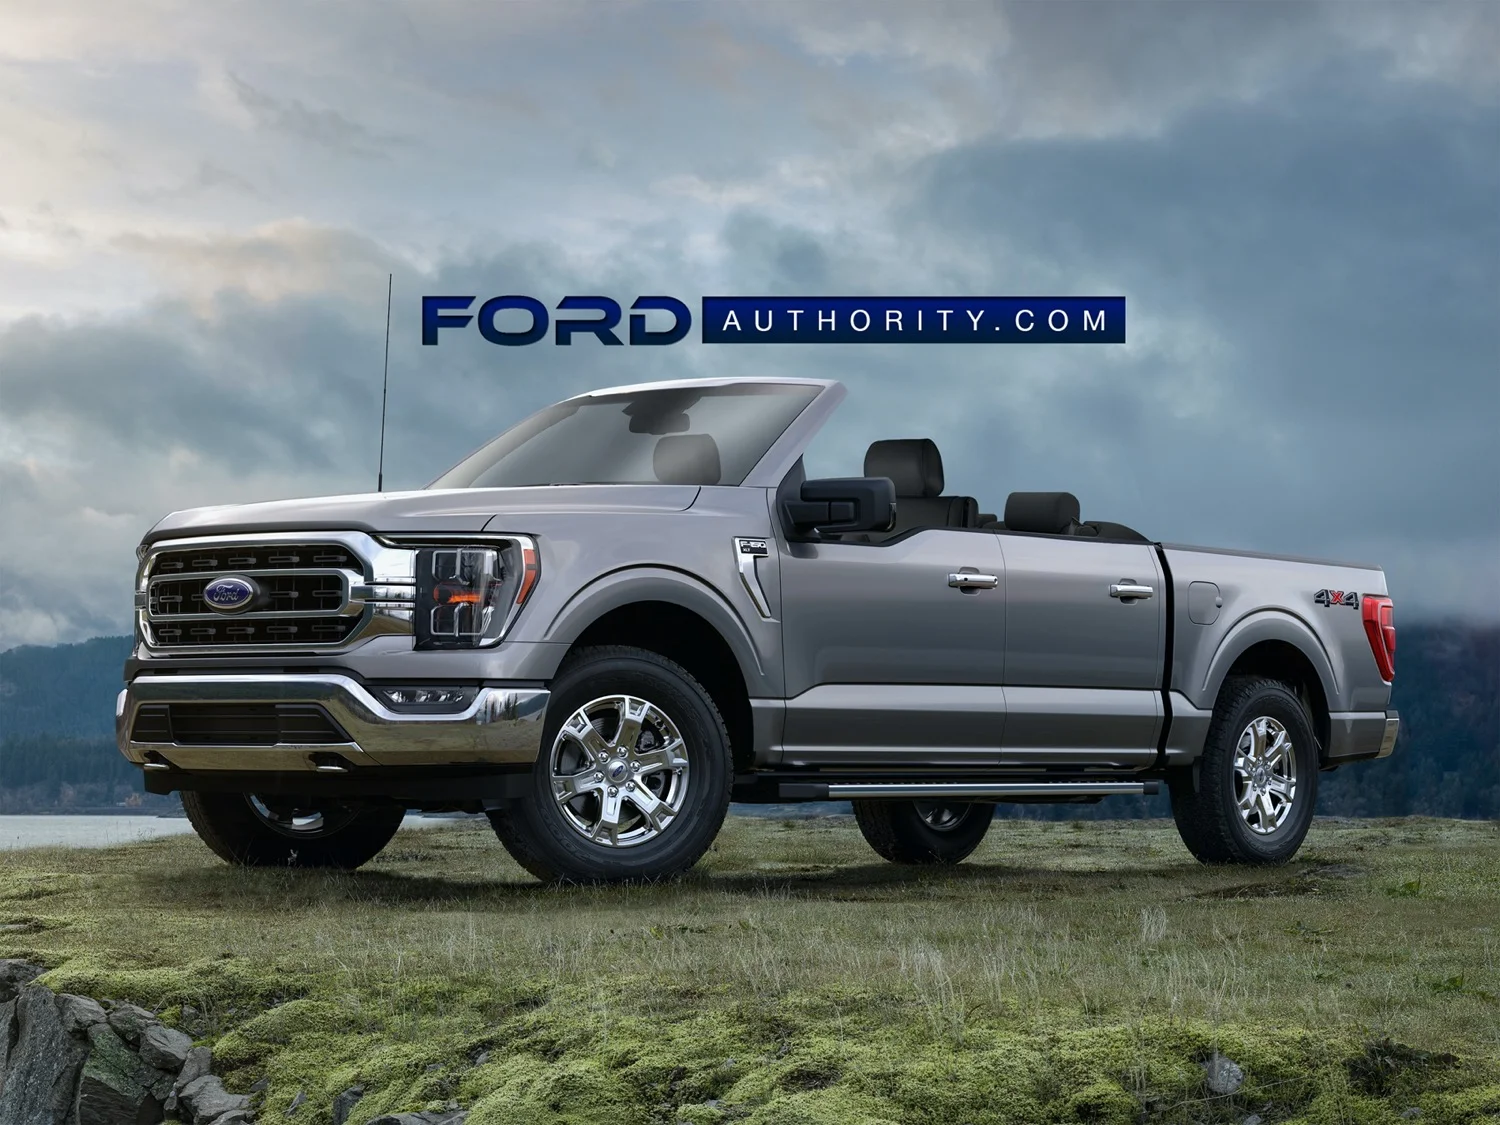 2022 Ford F150 Convertible Introduced As Ultimate OpenAir 4X4 Vehicle